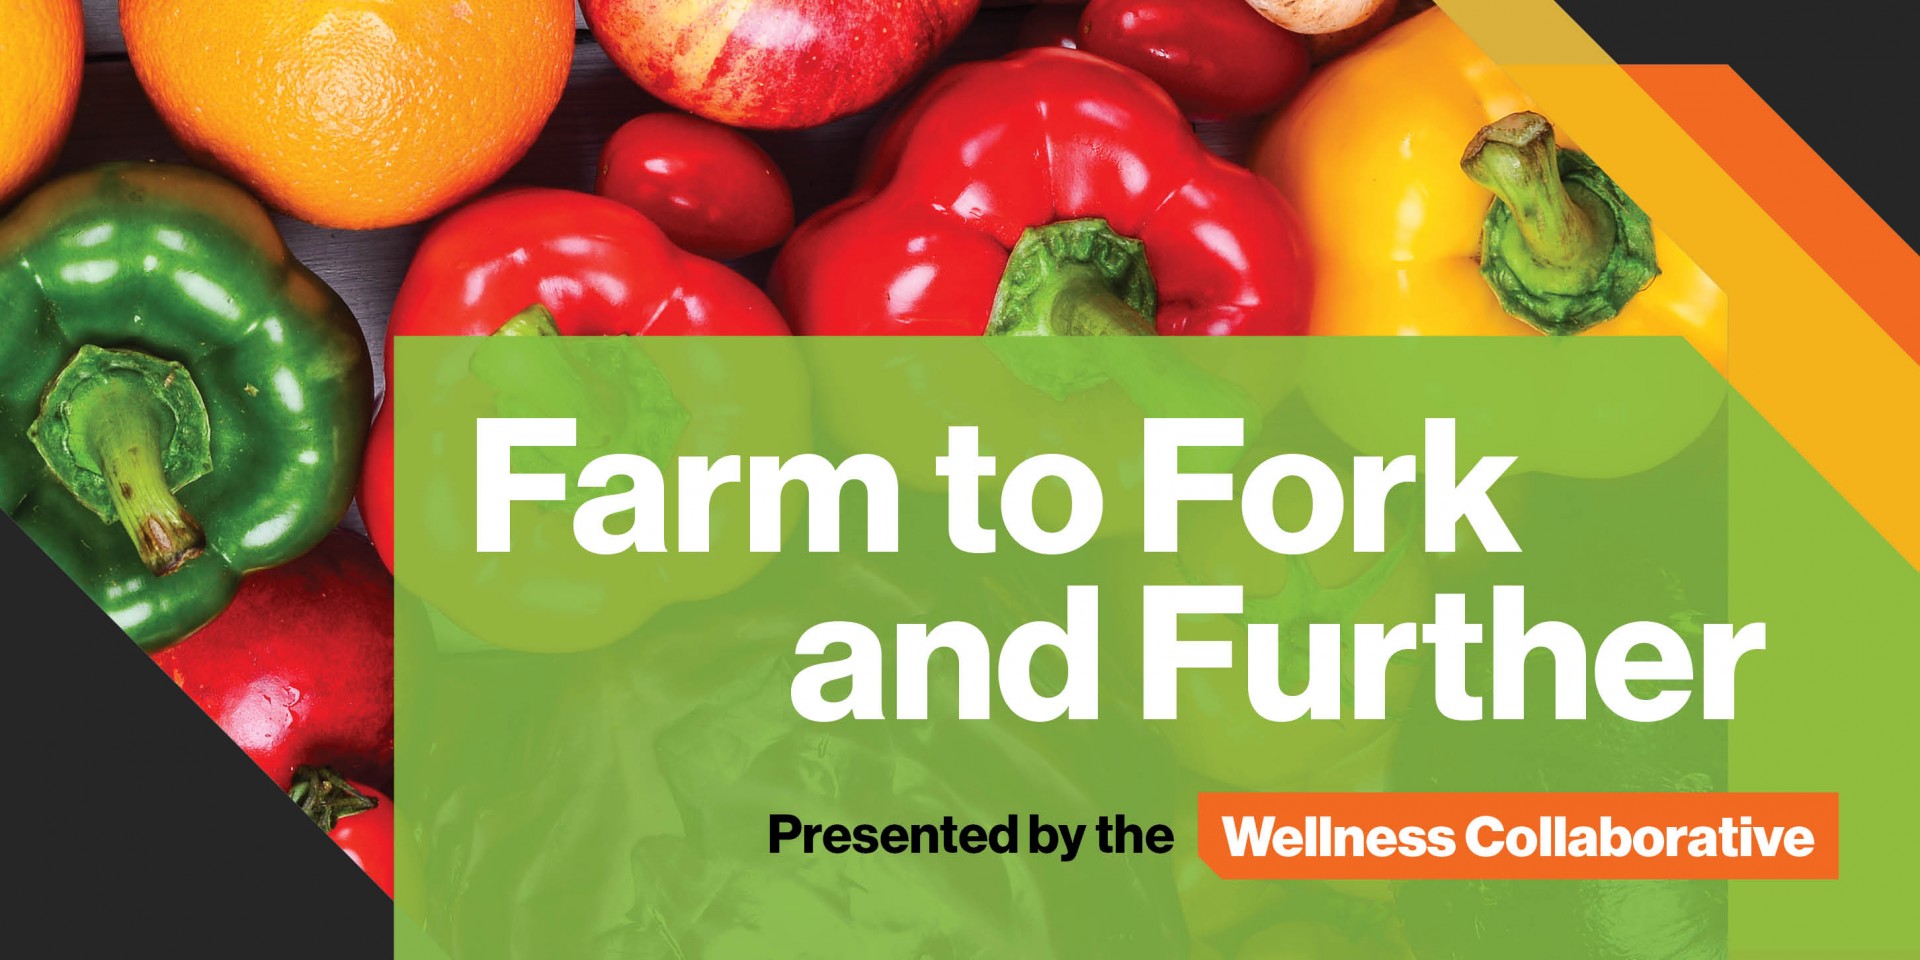 Farm to Fork and Further Presented by the Wellness Collaborative